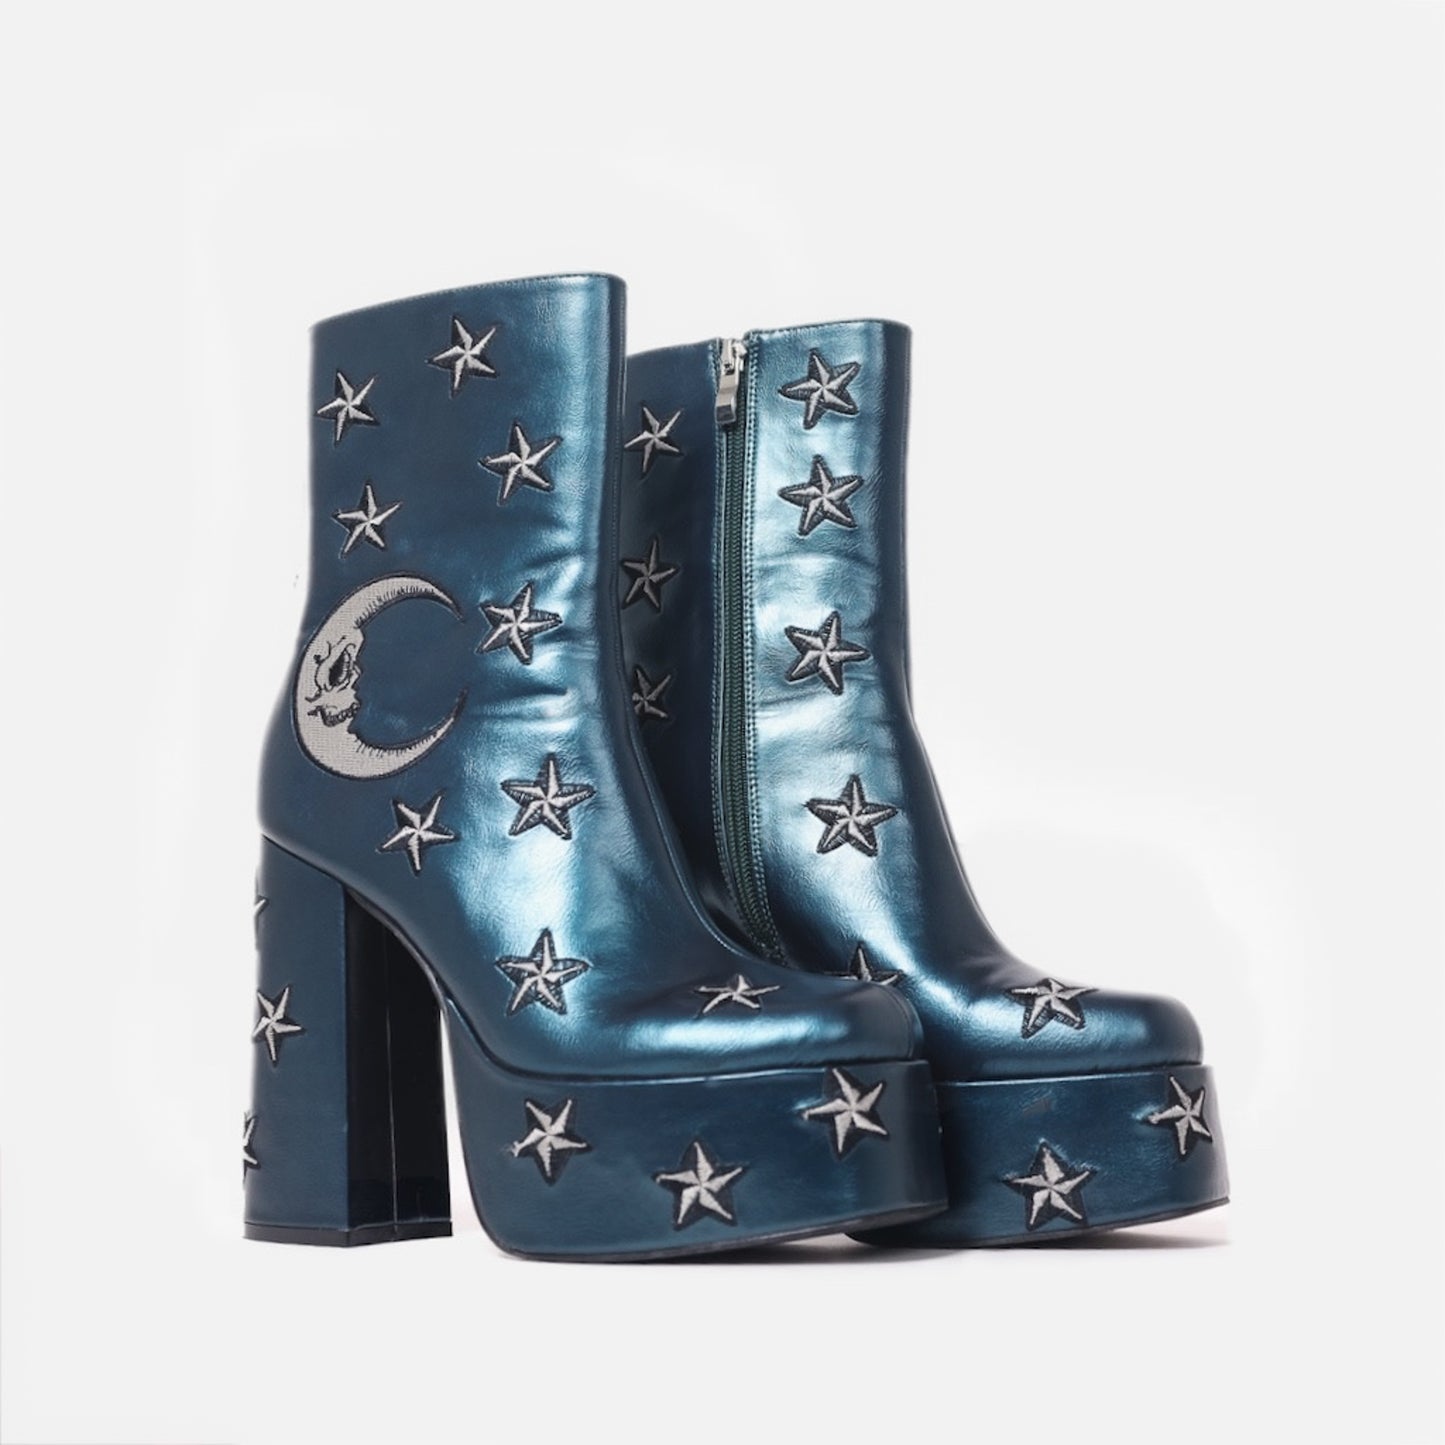 Dreams of Mooncraft Teal Heeled Boots - Ankle Boots - KOI Footwear - Blue - Three-Quarter View